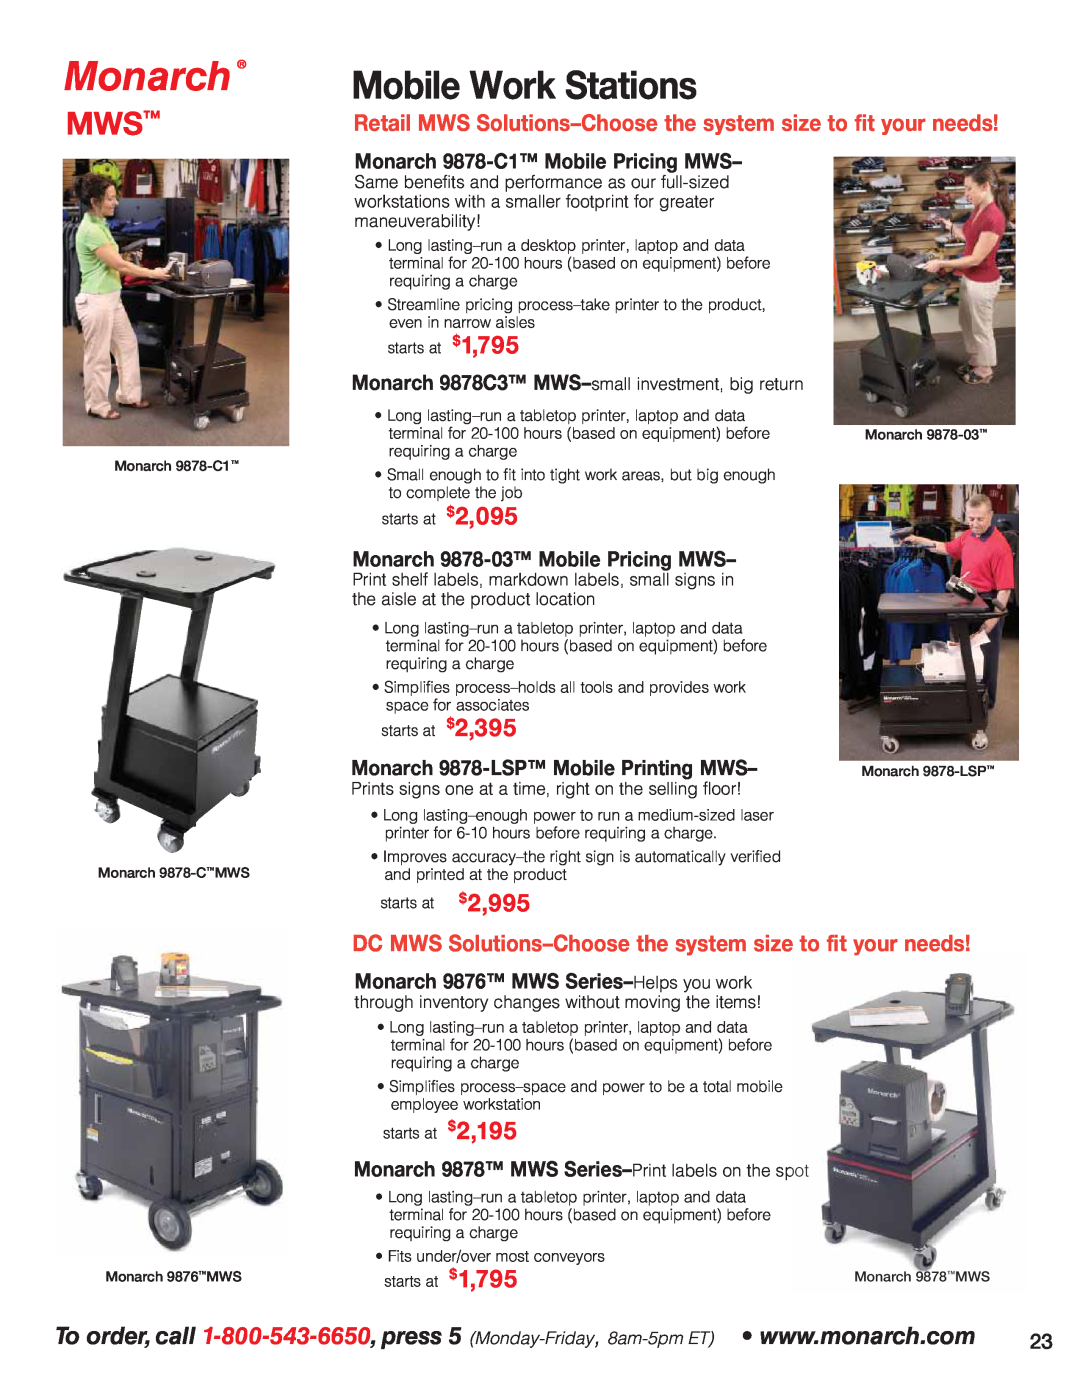 Avery 6039 Mobile Work Stations, Monarch 9878-C1 Mobile Pricing MWS, Monarch 9878-03 Mobile Pricing MWS, 1,795, starts at 